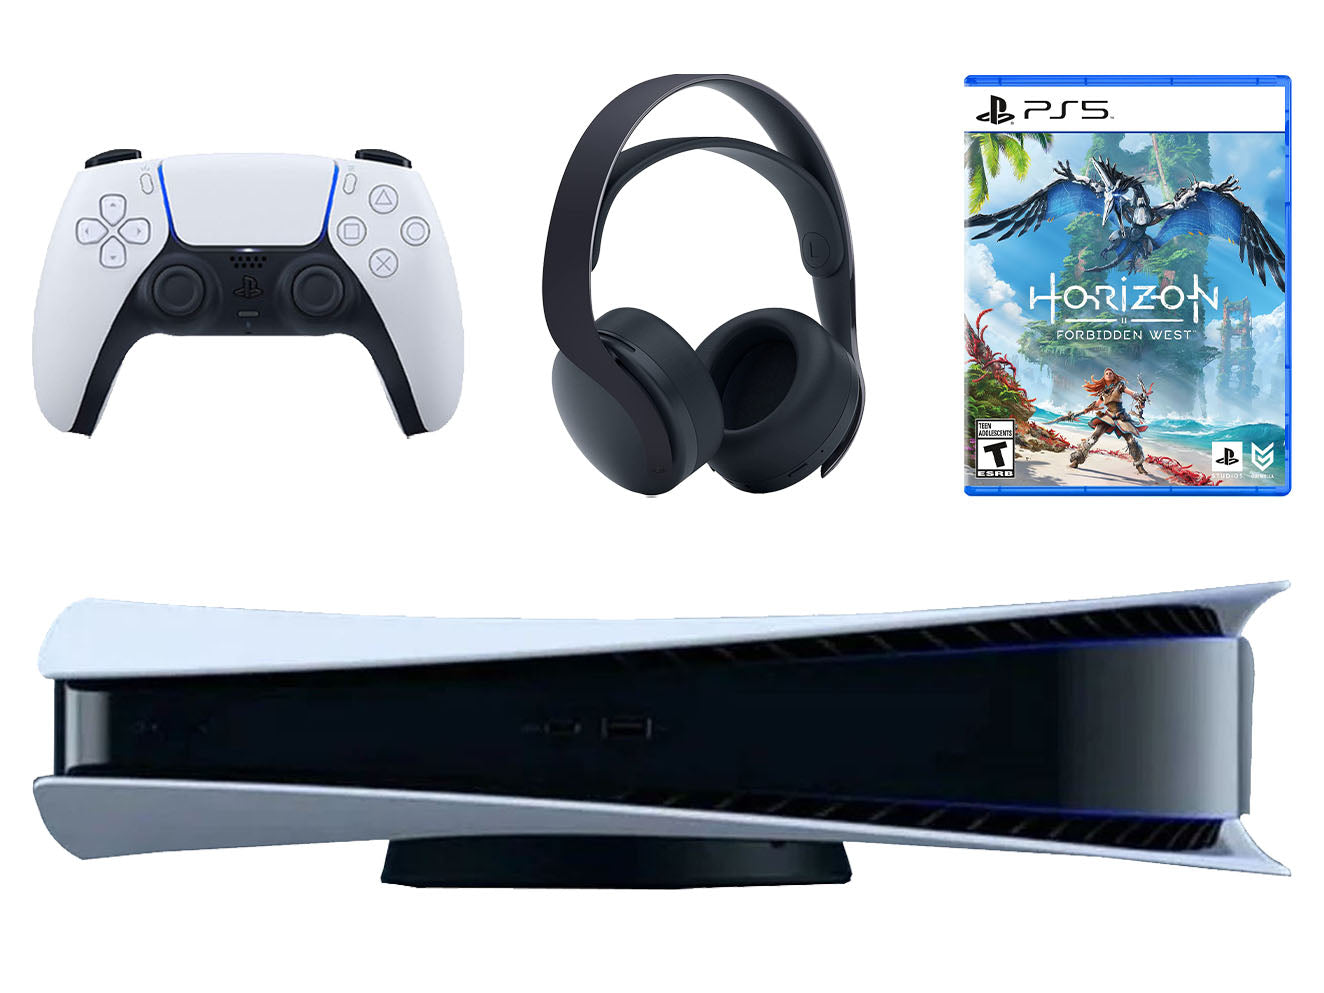 Sony Playstation 5 Disc Version Console with Black PULSE 3D Wireless Gaming Headset and Horizon Forbidden West - Pro-Distributing